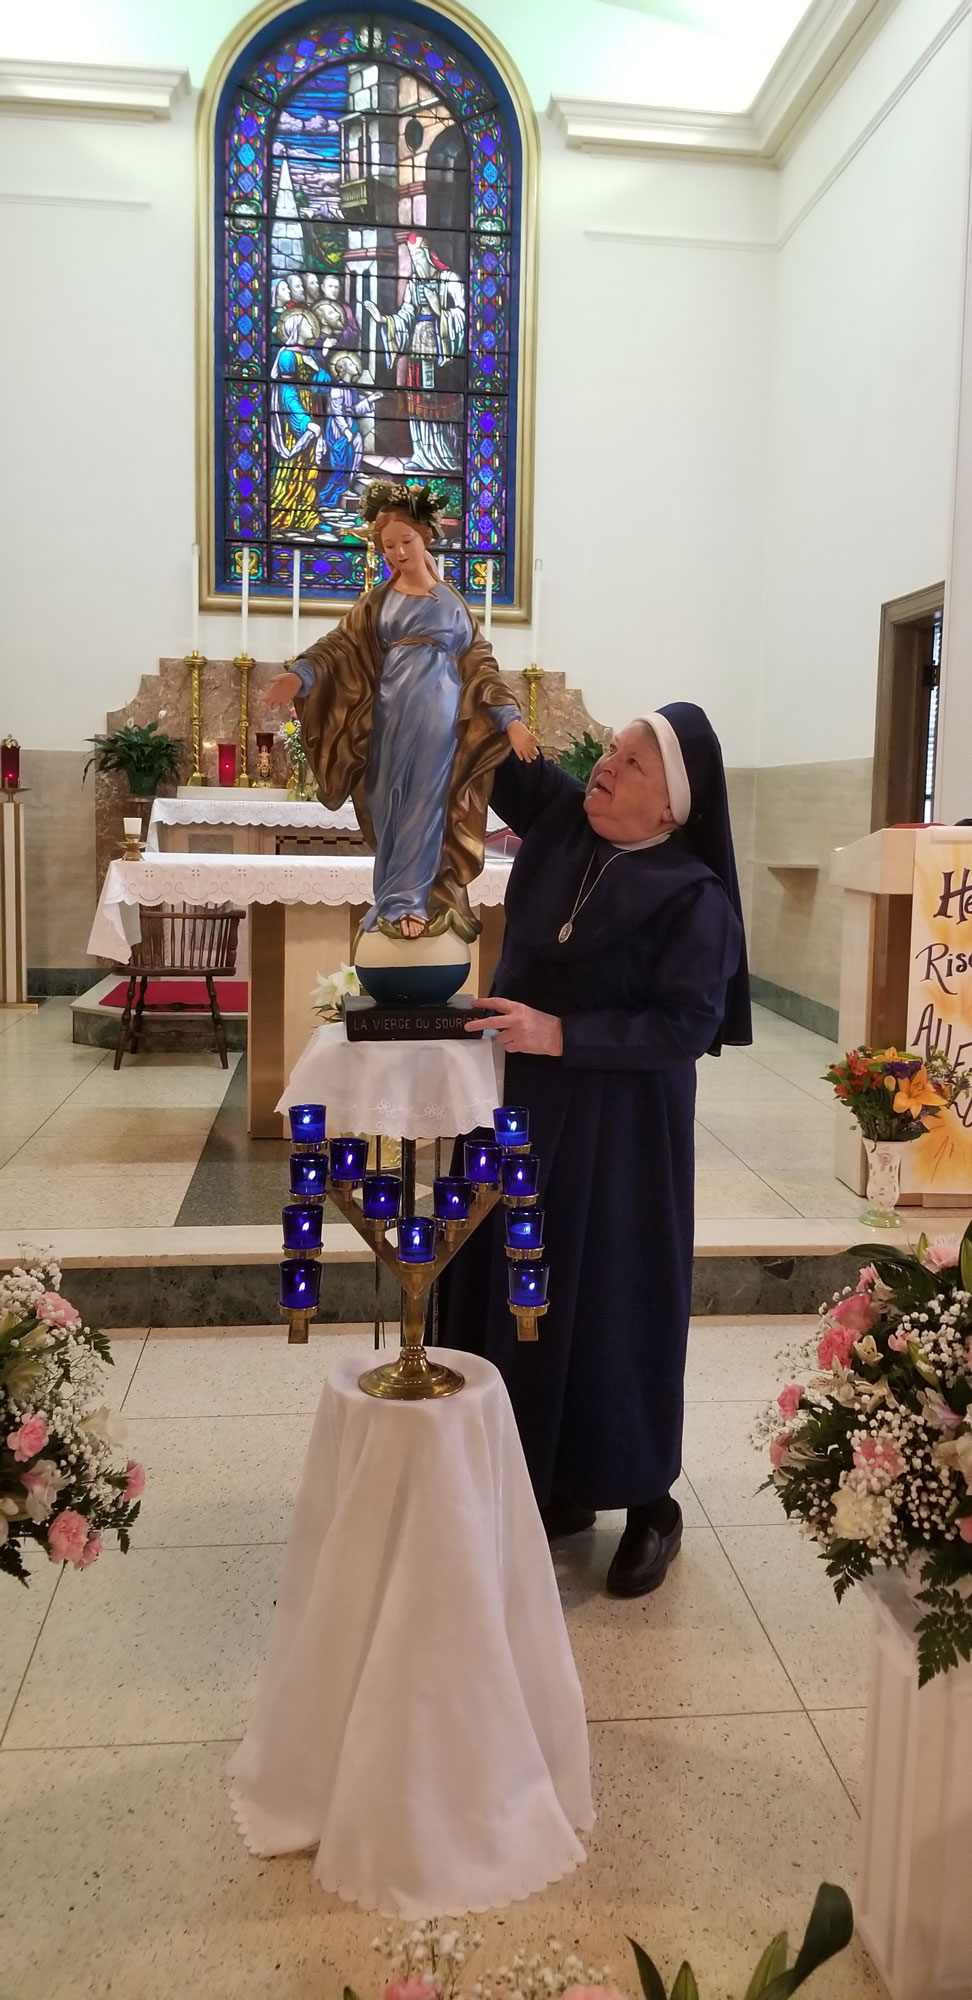 union of presentation sisters of the blessed virgin mary